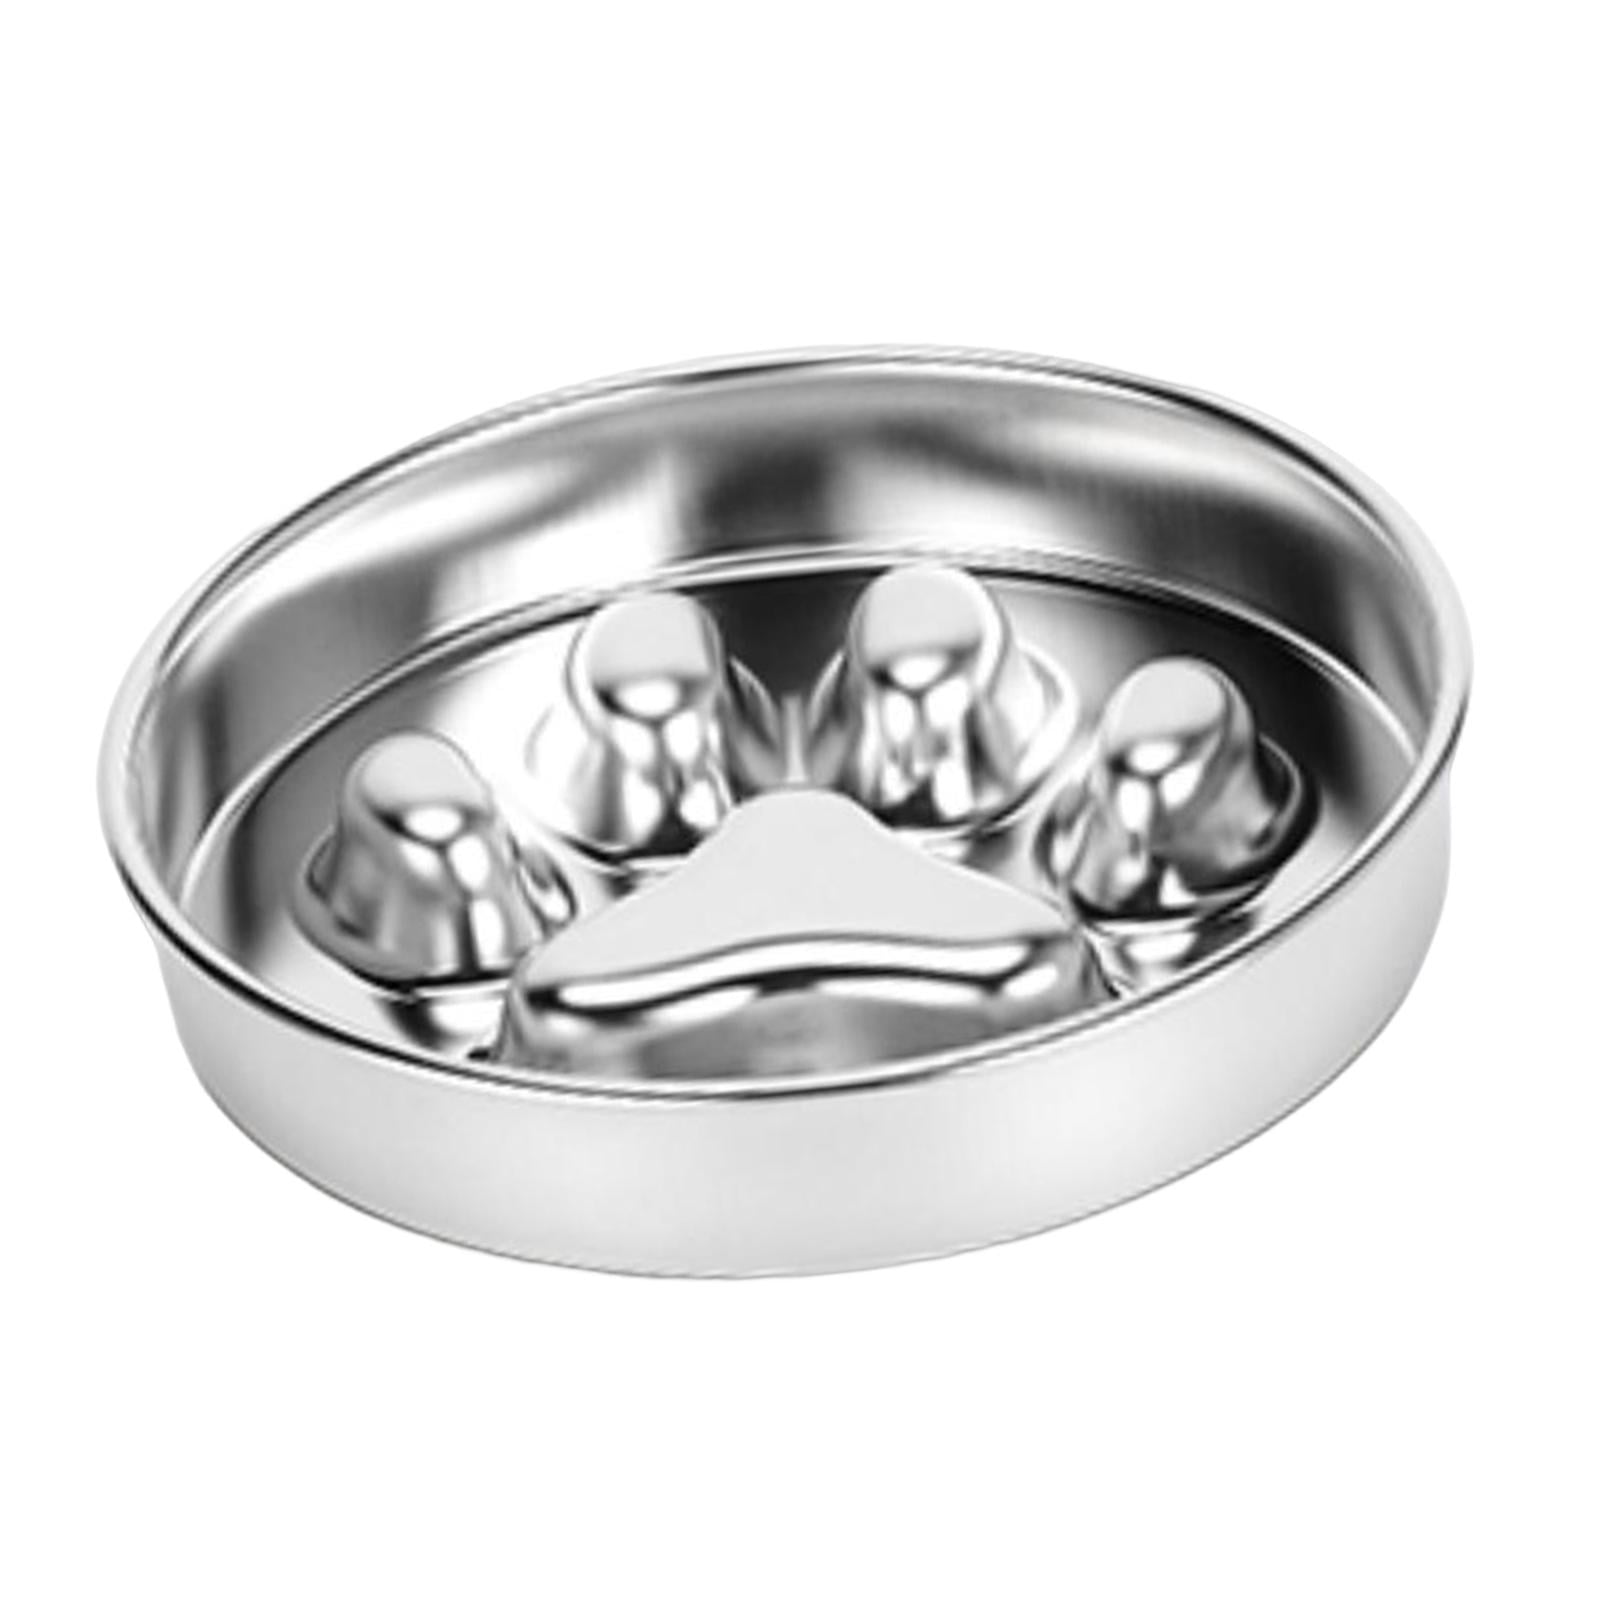 Slow Feed Dog Bowl for Raised Pet Feeders - 4-Cup Star Maze Bowl for Feeder Holes